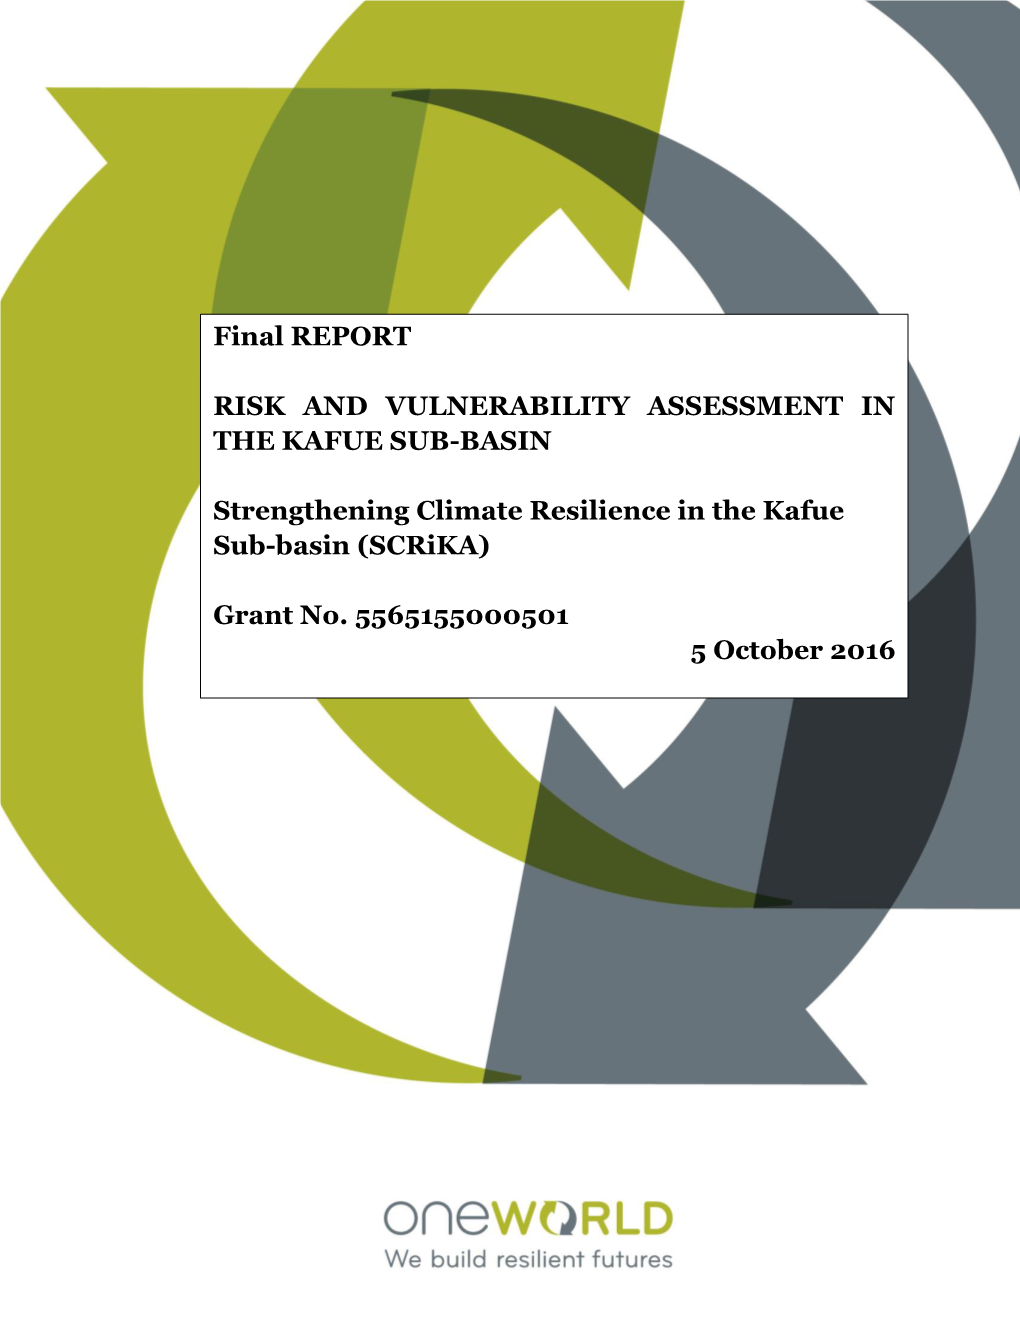 Final REPORT RISK and VULNERABILITY ASSESSMENT IN